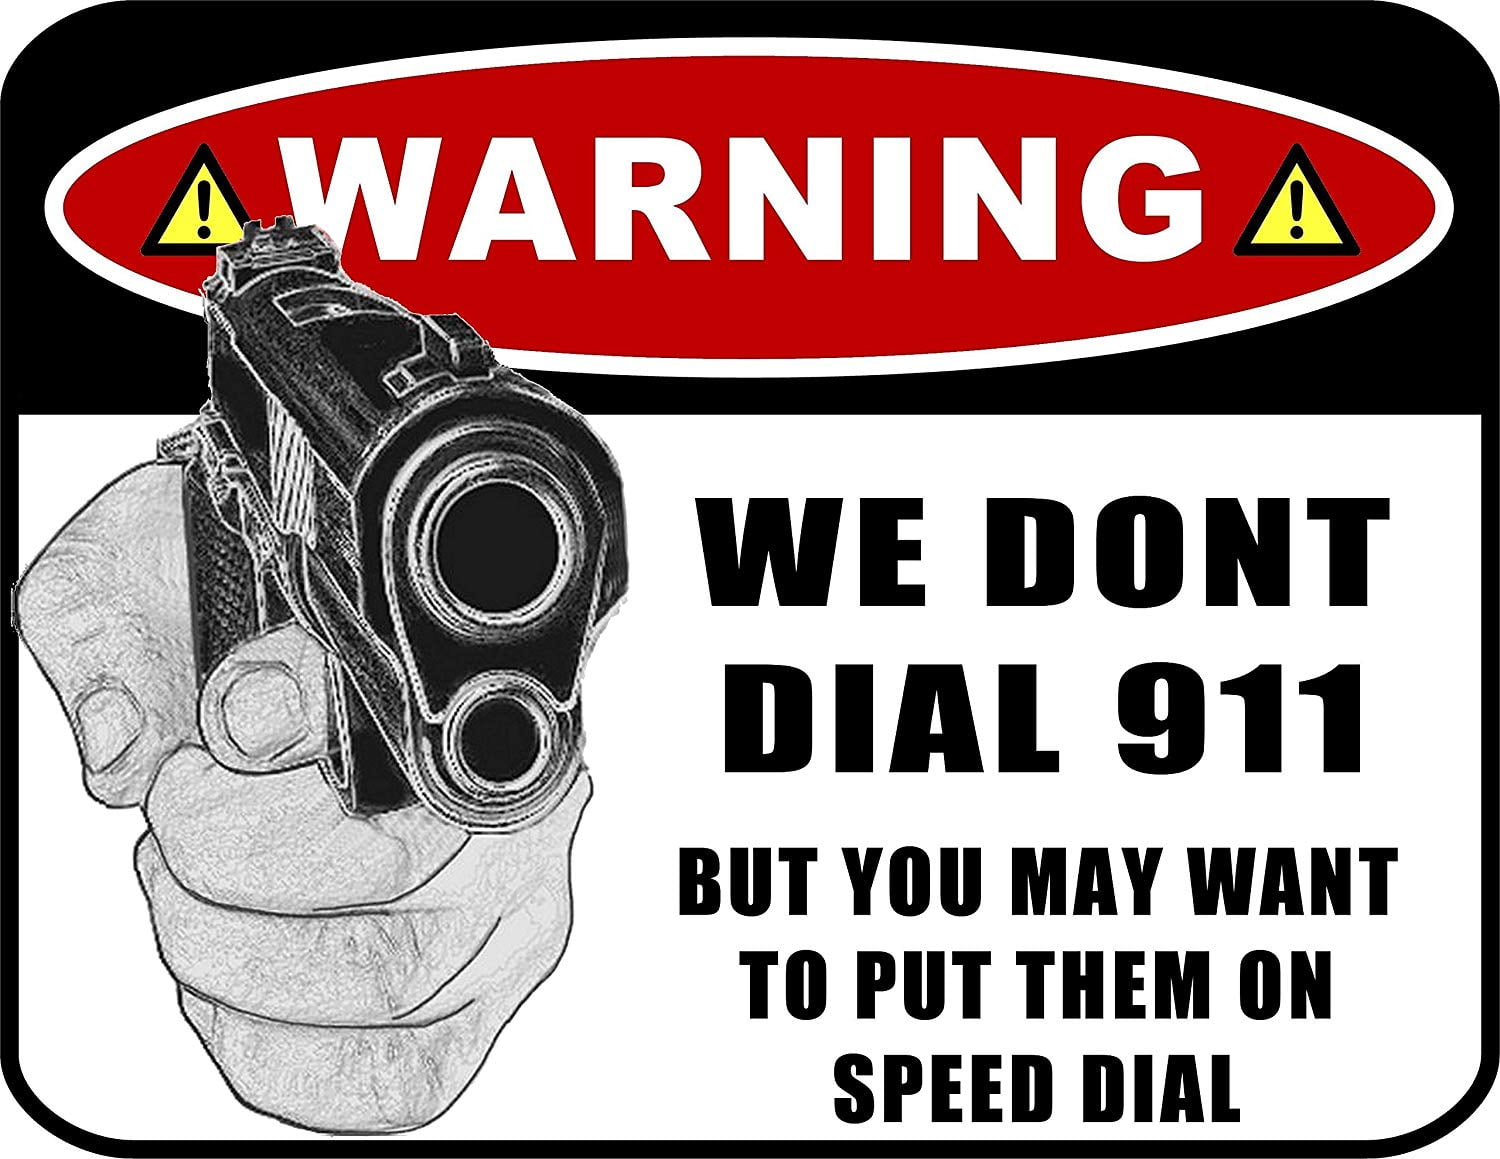 Pcscp Warning We Don`t Dial 911 But You May Want To Put Them On Speed